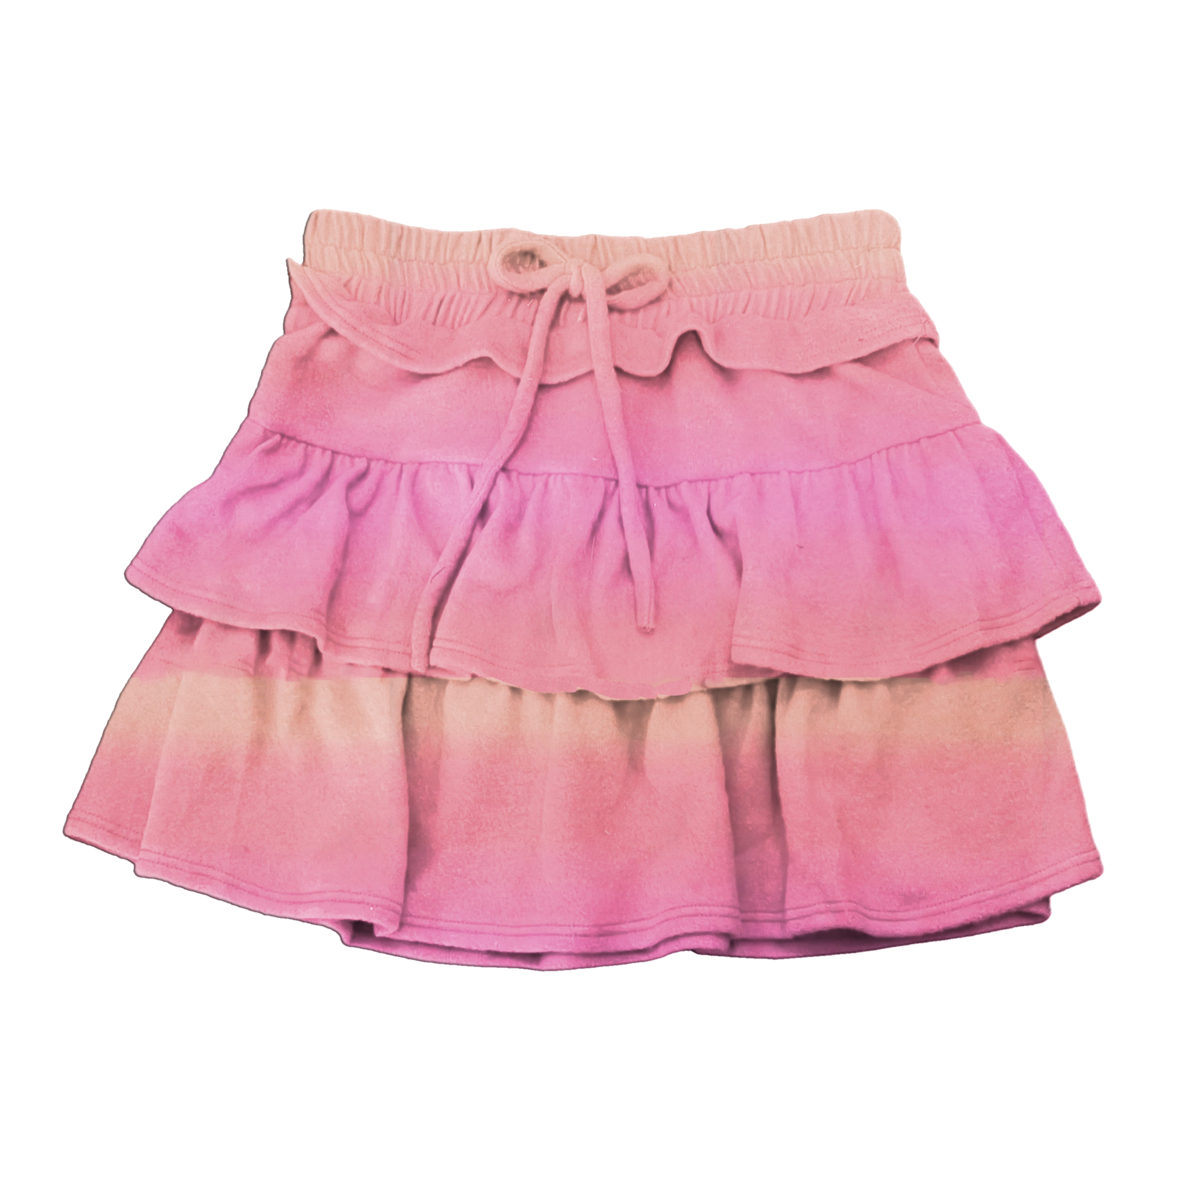 Pink Ombre Ruffle Tiered Skirt